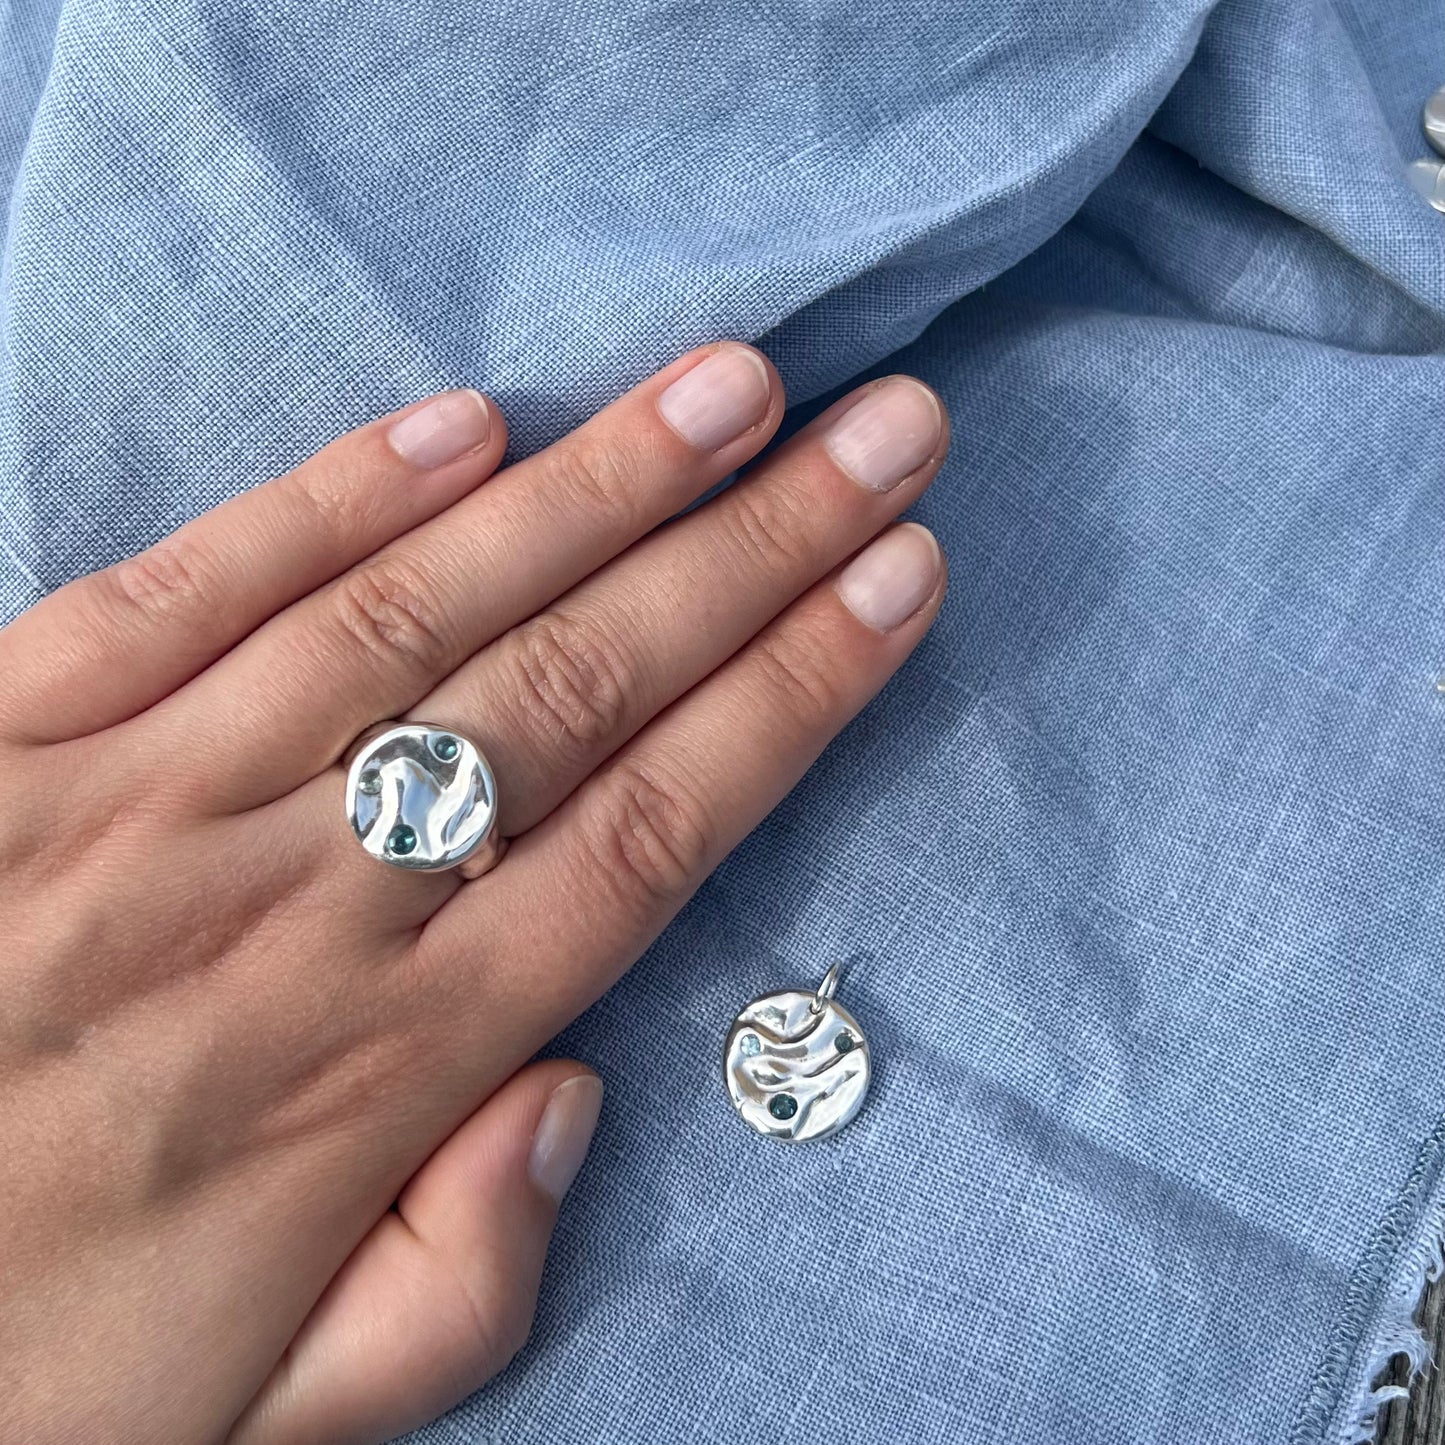 The triple topaz splash ring on a hand pictured next to the triple topaz rock pool pendant on a blue linen background.